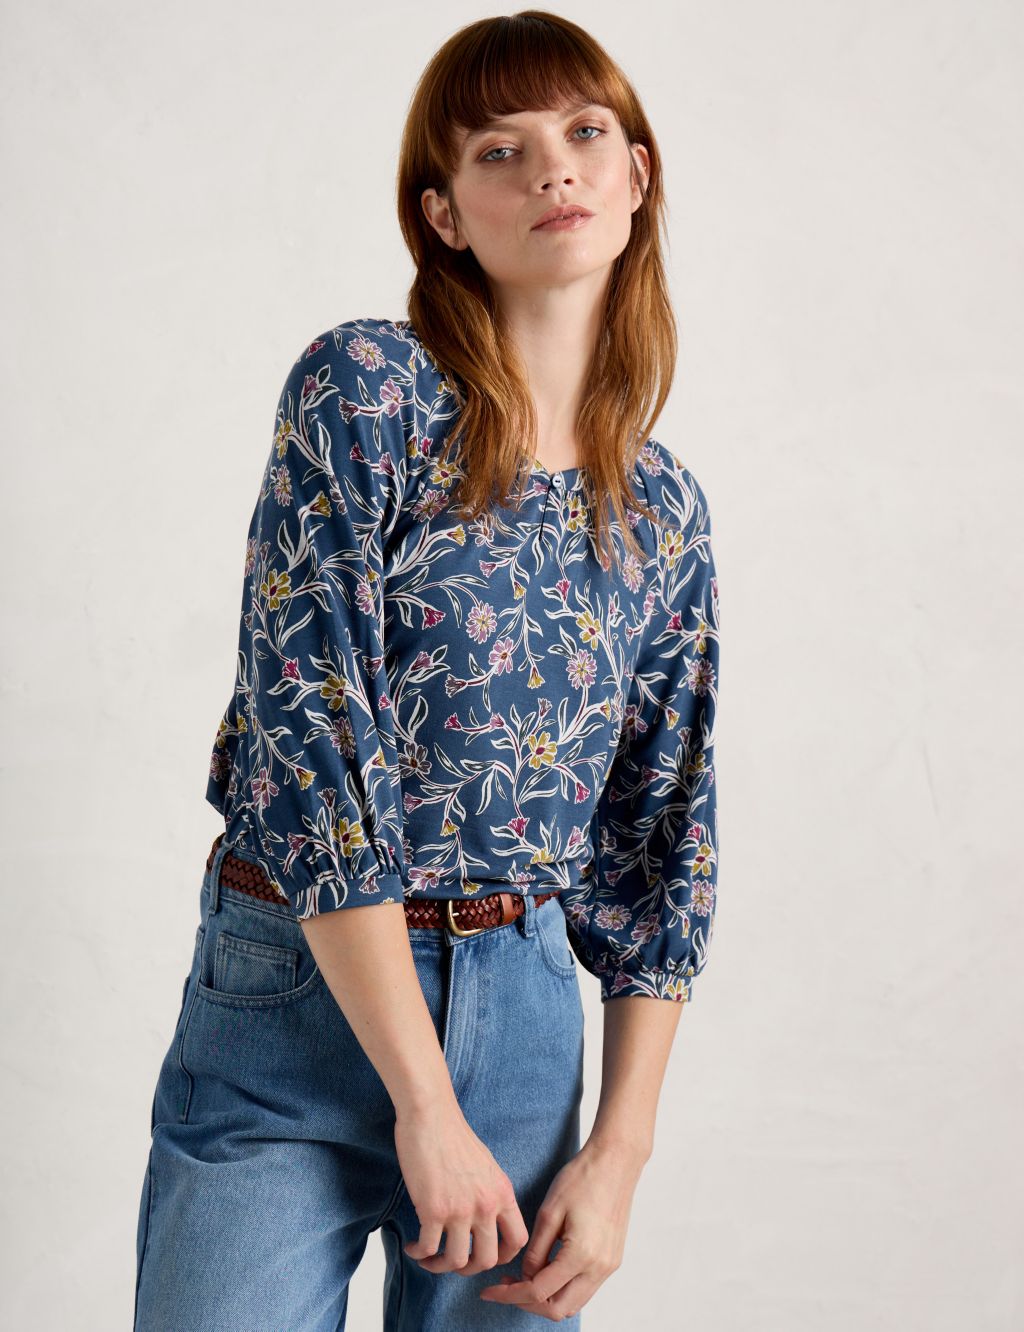 Floral Top With Cotton | Seasalt Cornwall | M&S